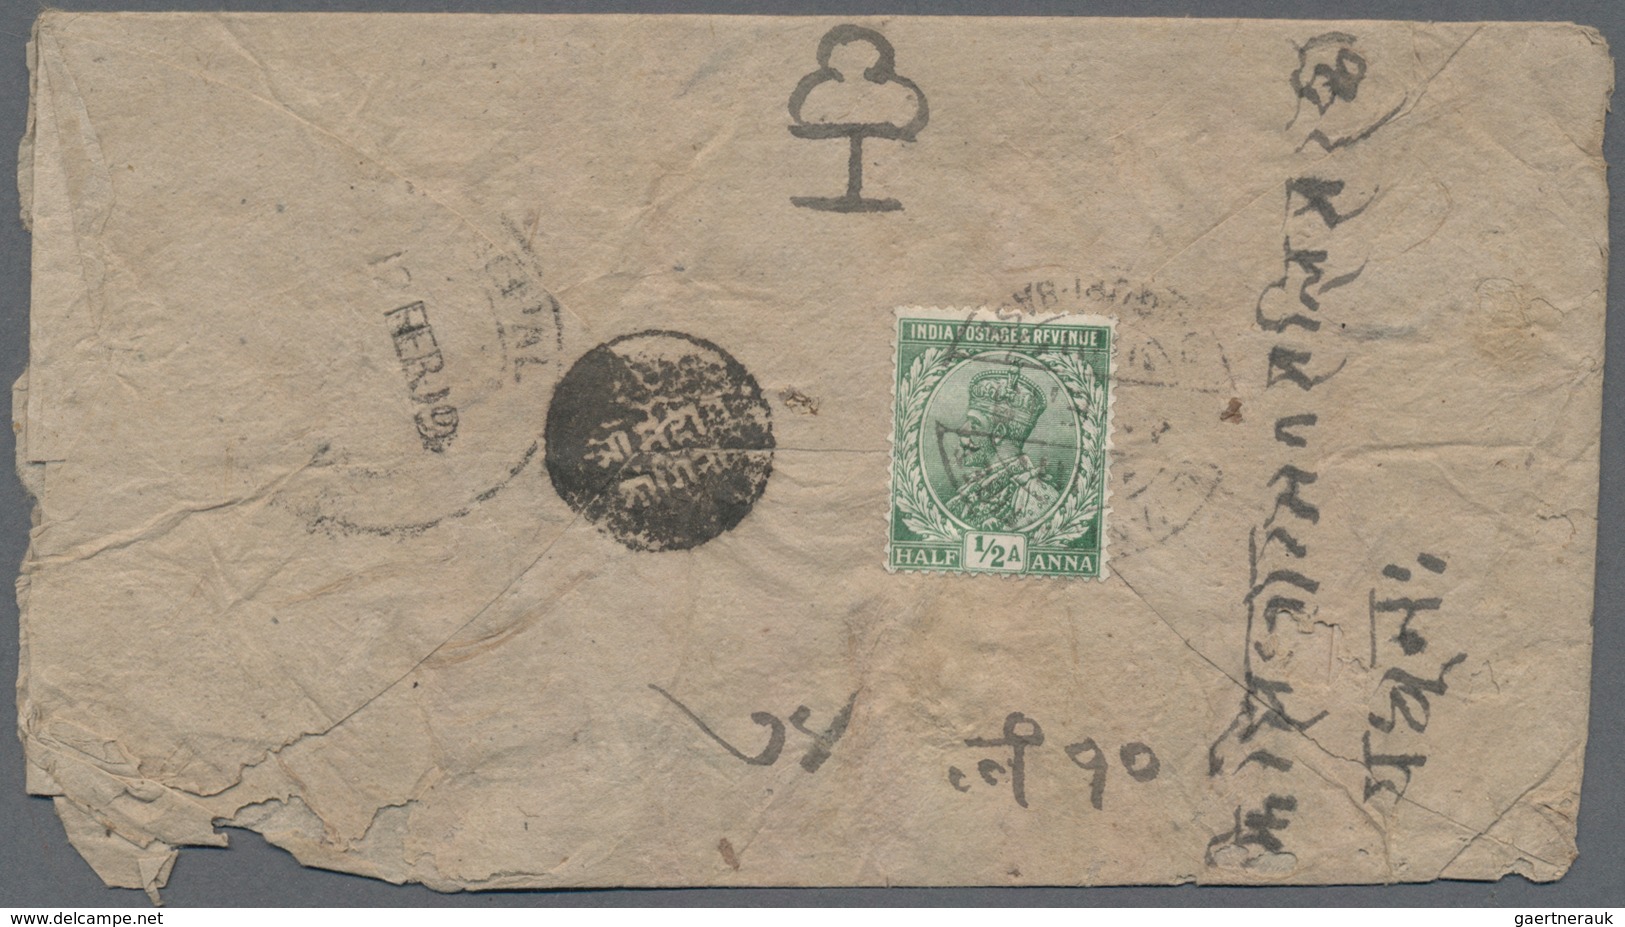 Tibet: 1919/36, India P.o. In Tibet, Covers (5) All To Nepal With "Siliguri Base Office 4 FE 19", Ot - Sonstige - Asien